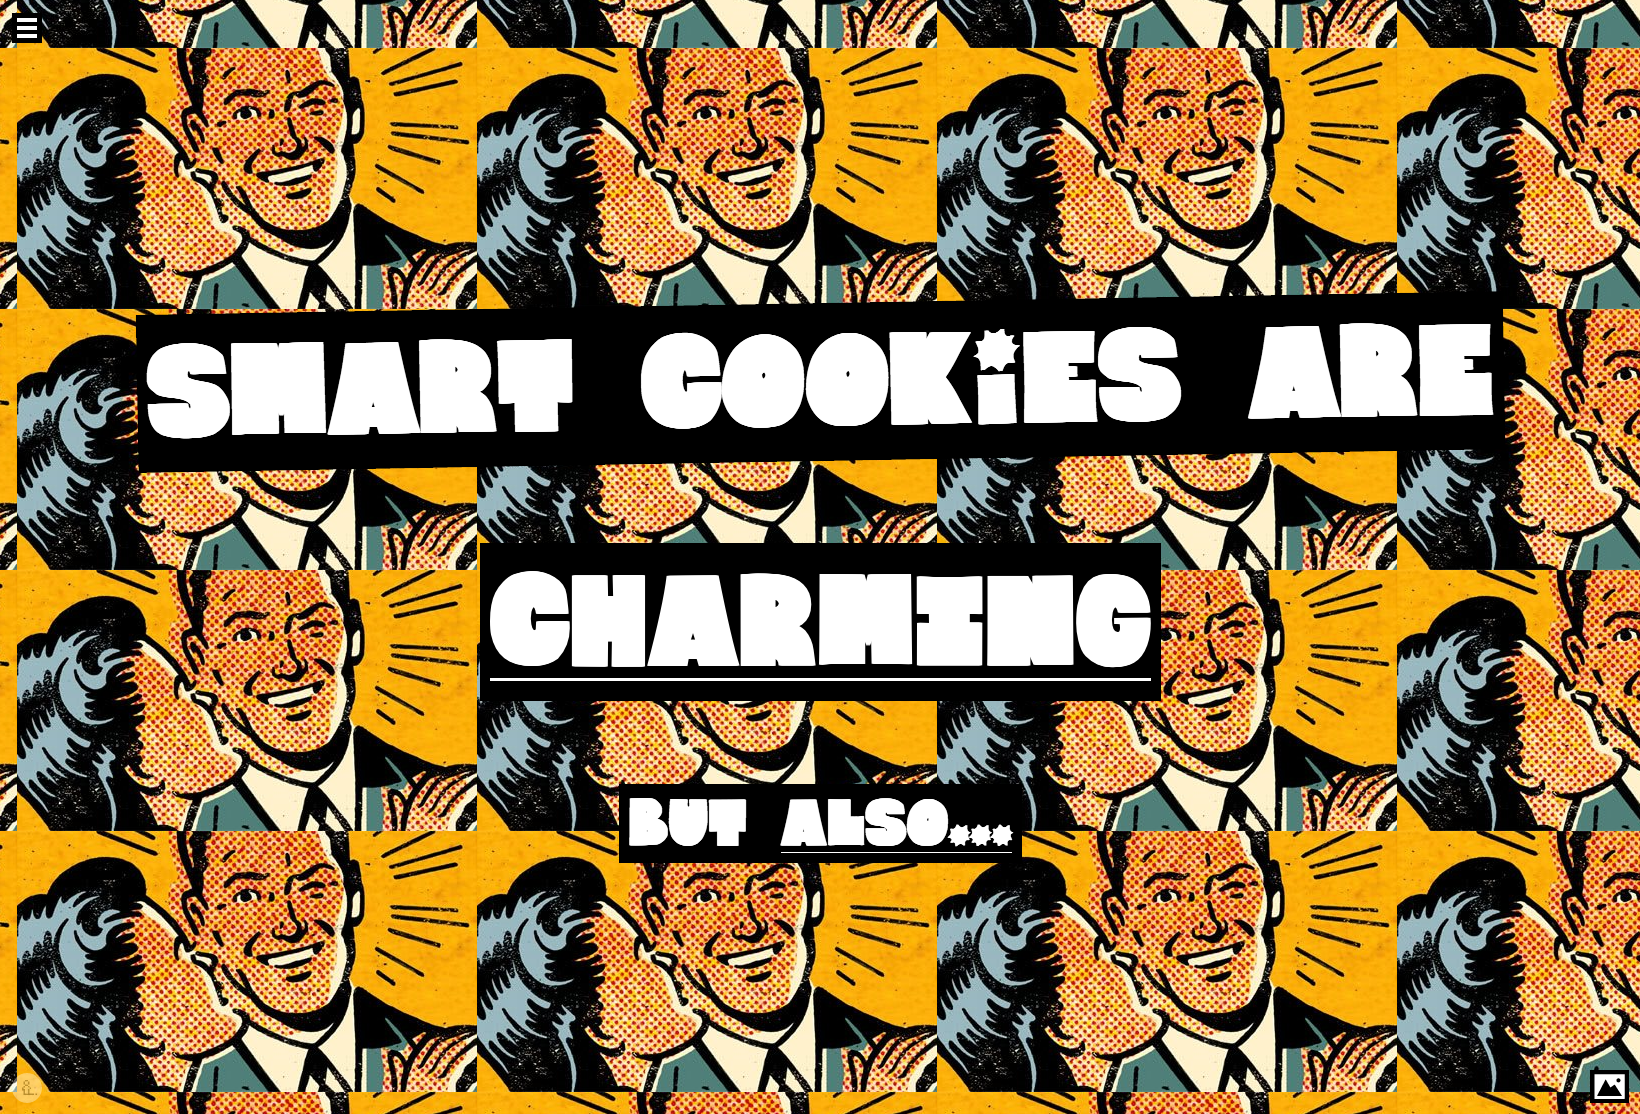 Smart Cookies are Charming